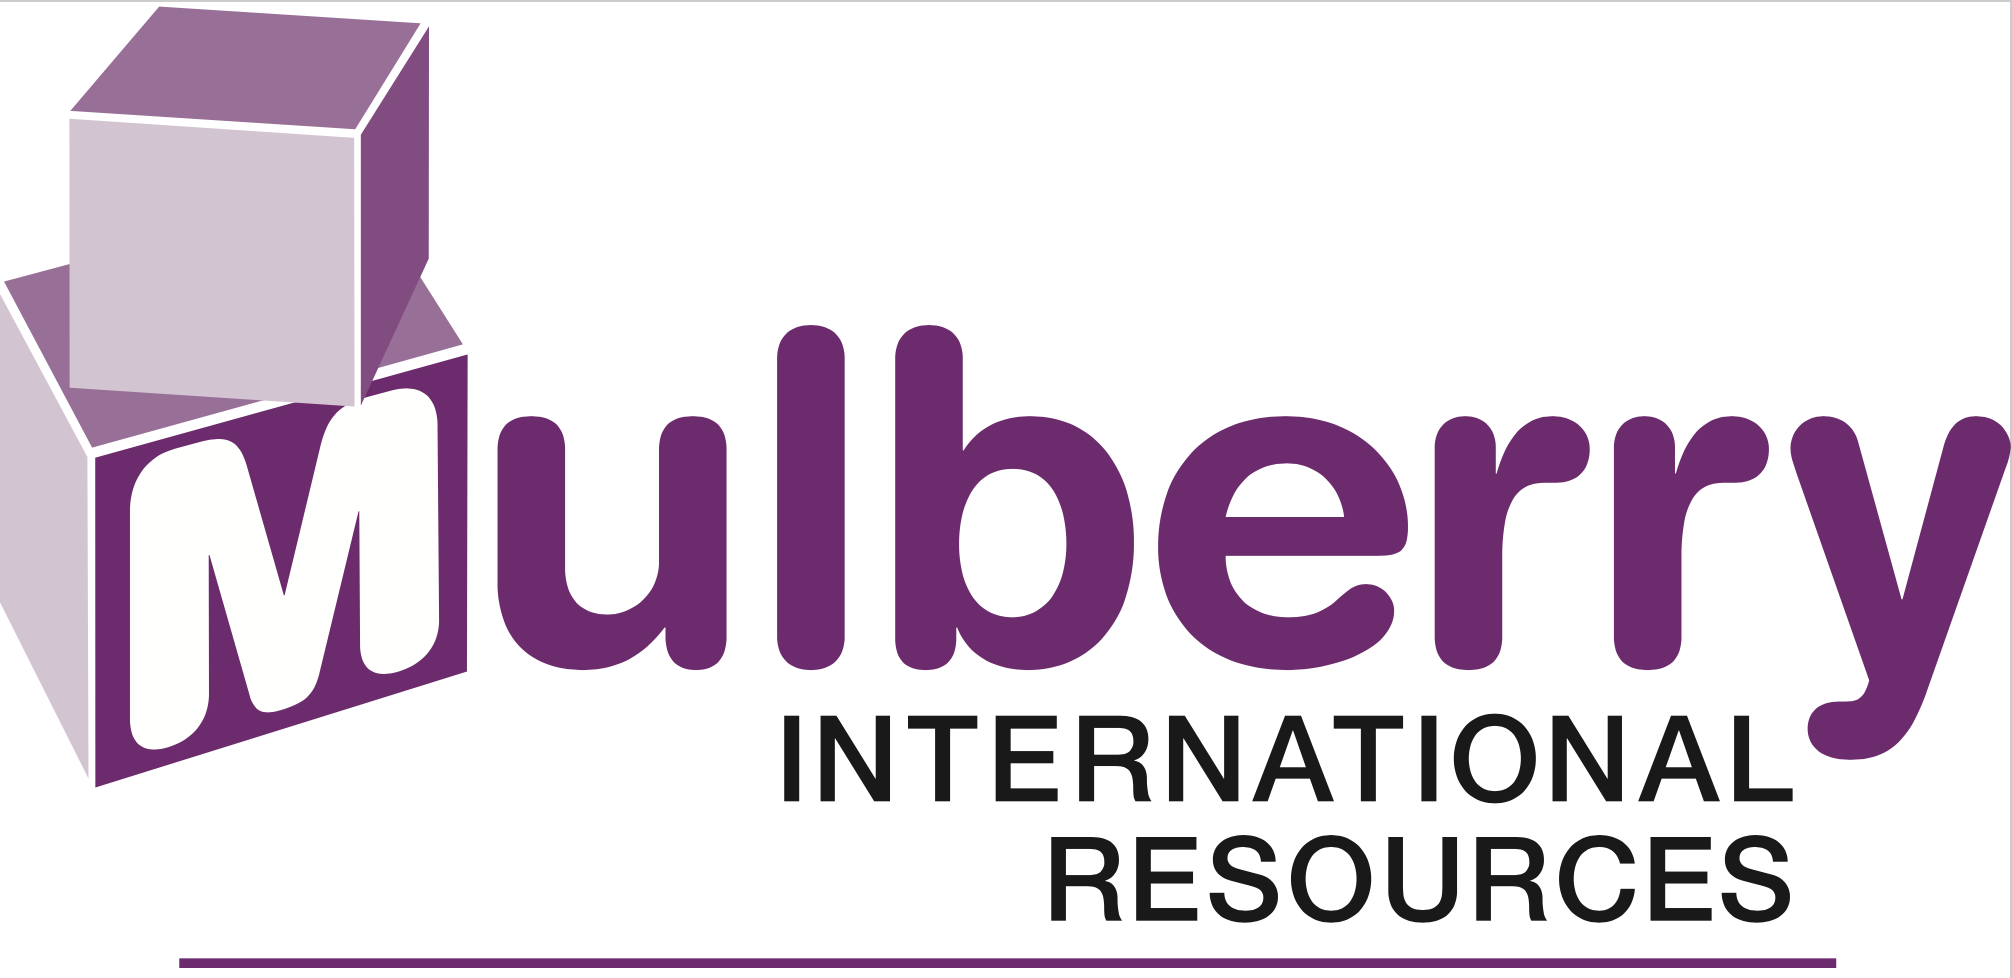 Mulberry International Resources